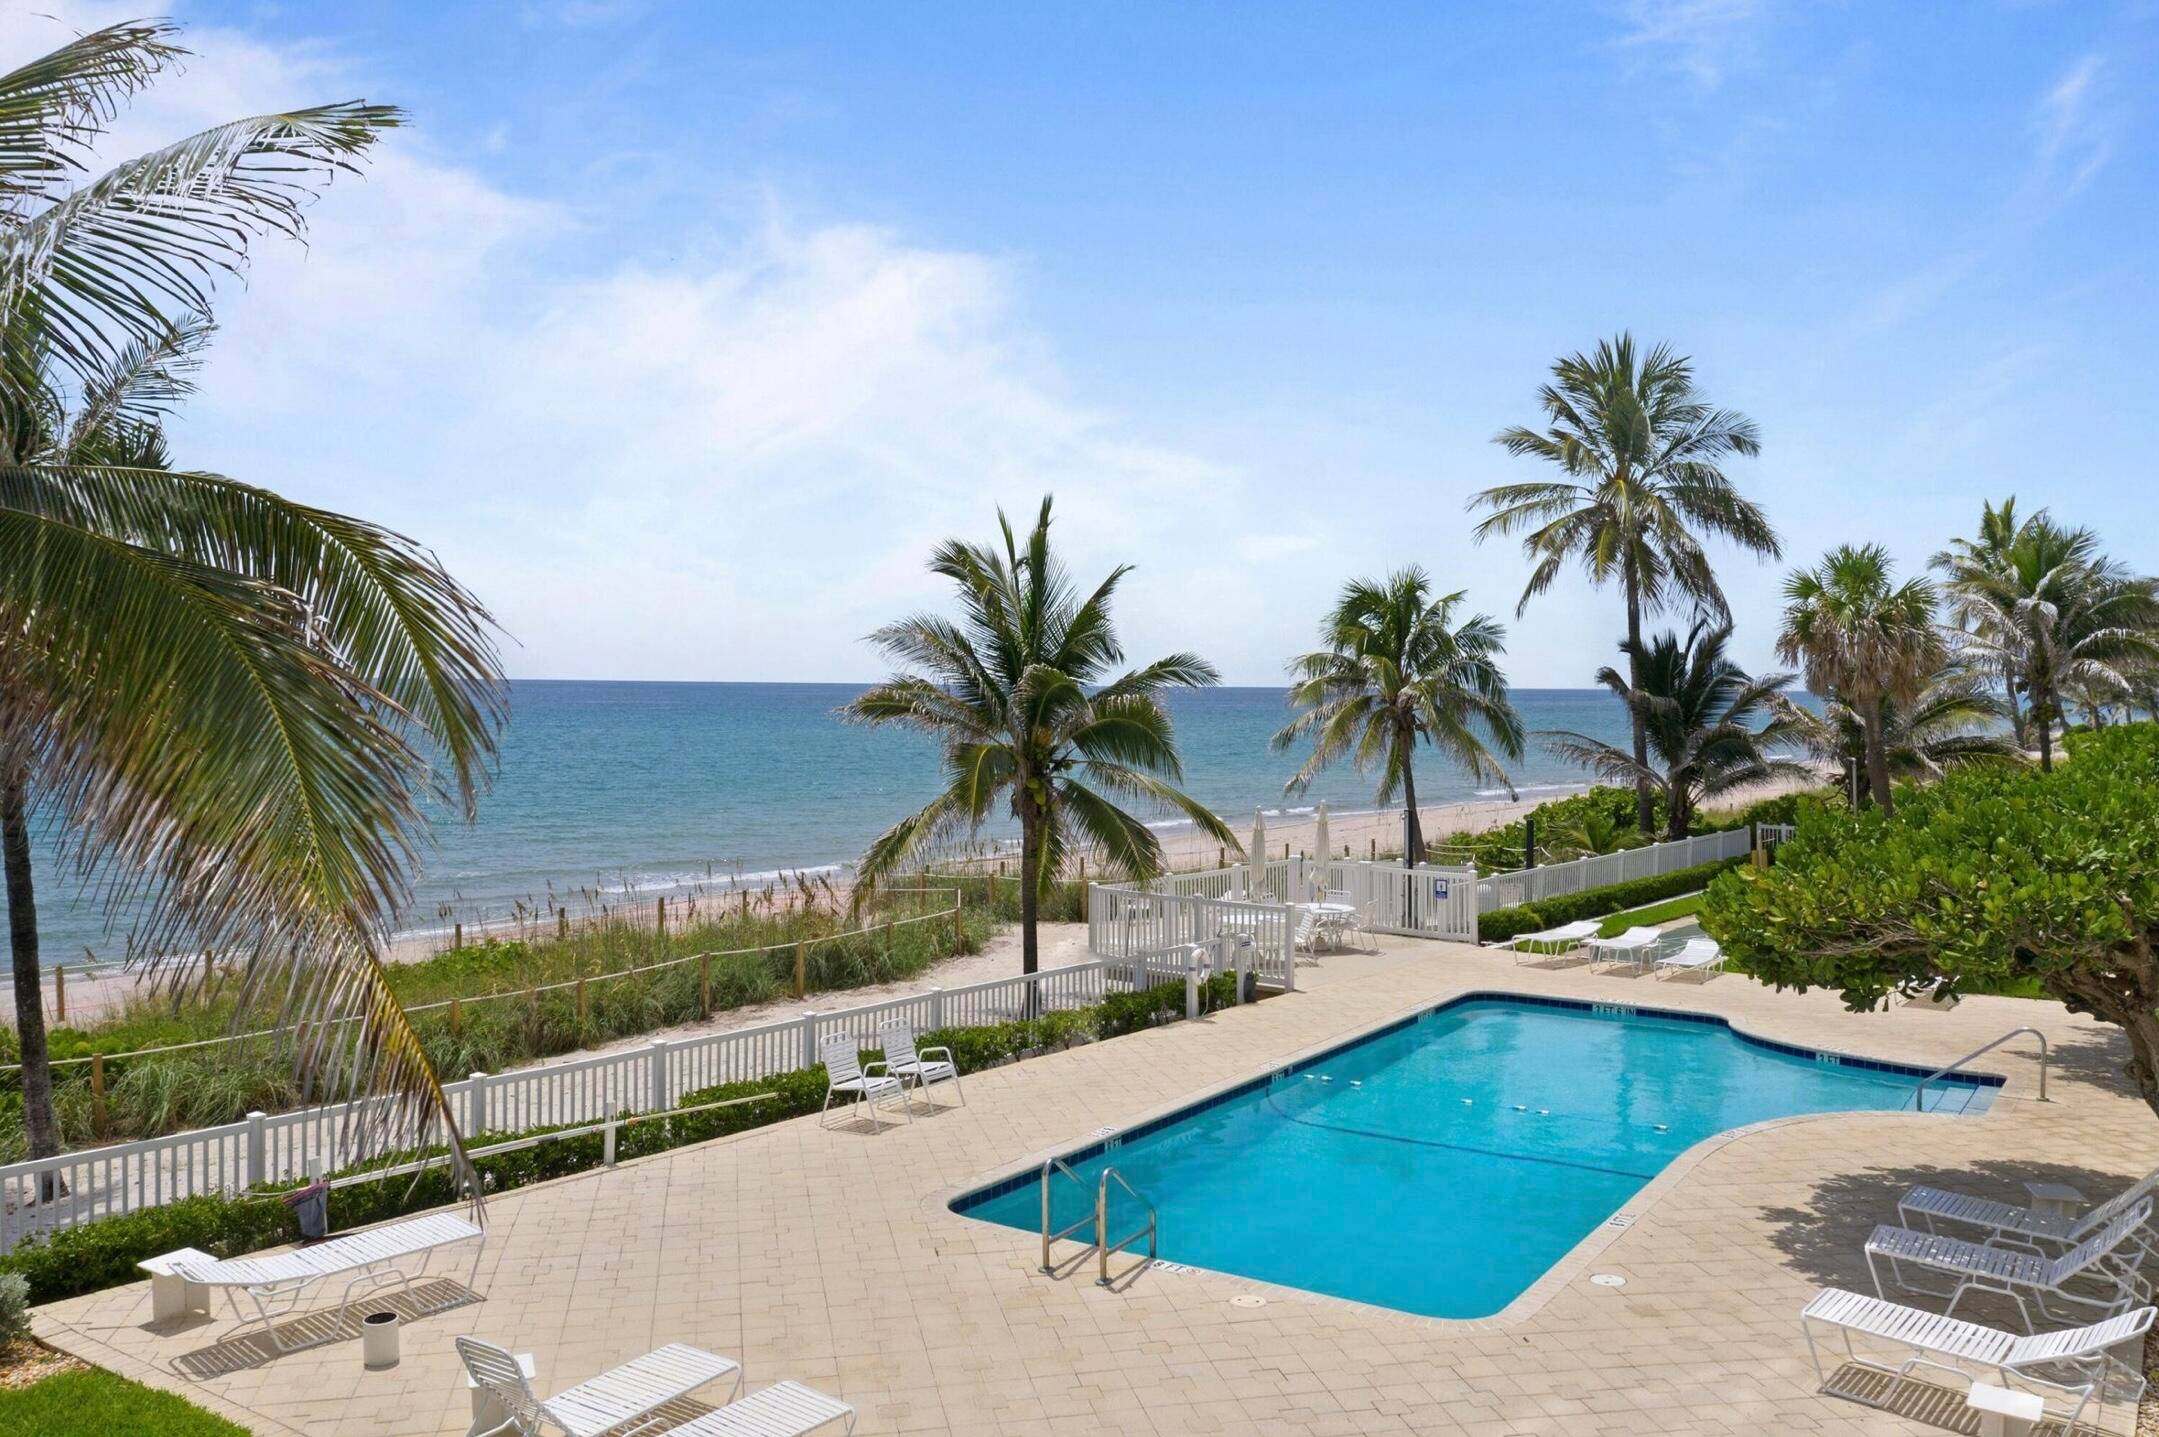 Nestled along the sun kissed shores of South Florida lies the exclusive enclave of Hillsboro Beach.